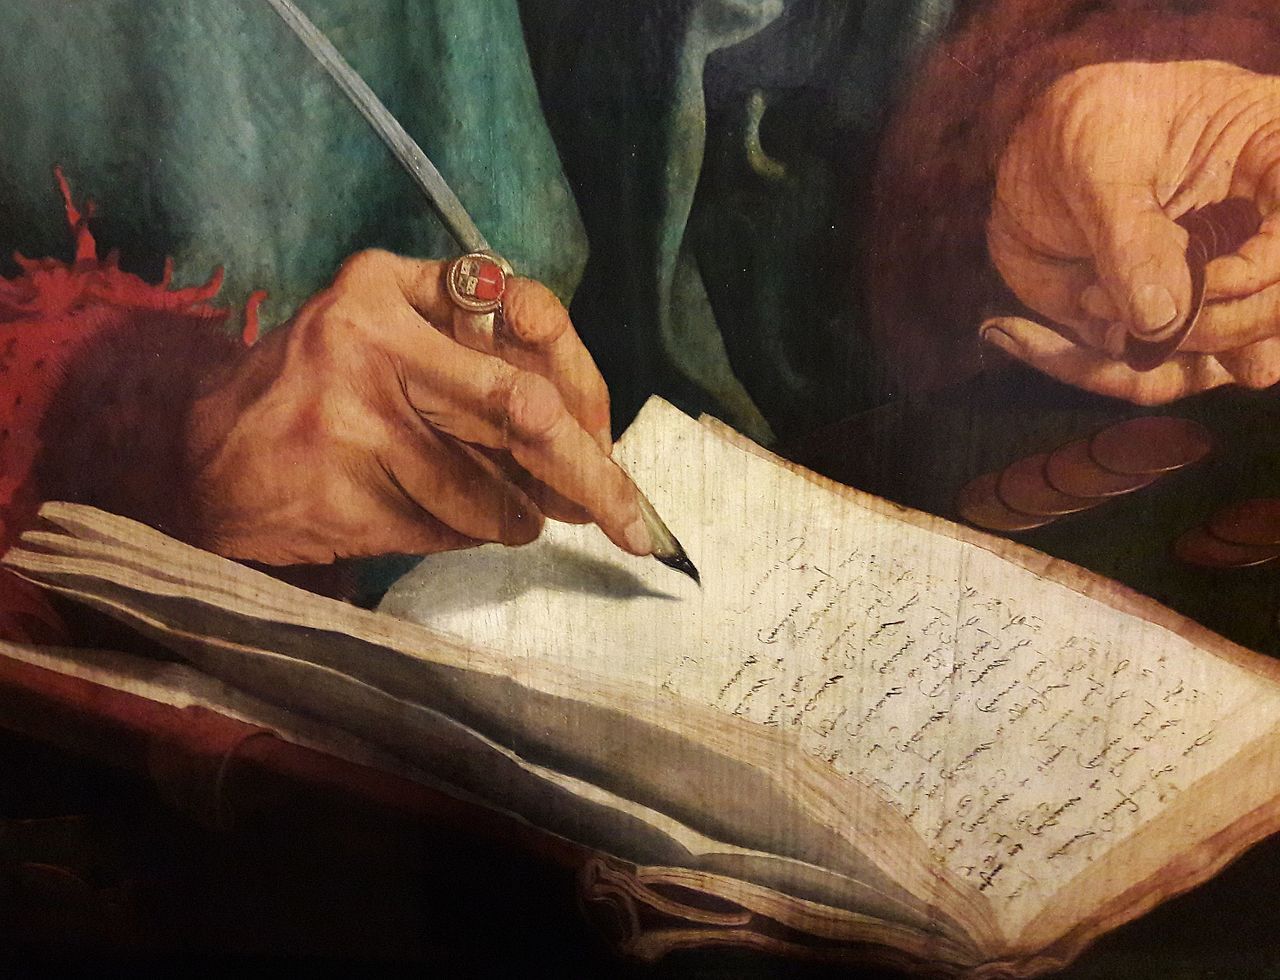 A detail from an old painting of someone writing in a book. One hand holds a quill with a jeweled ring and the other holds a coin.